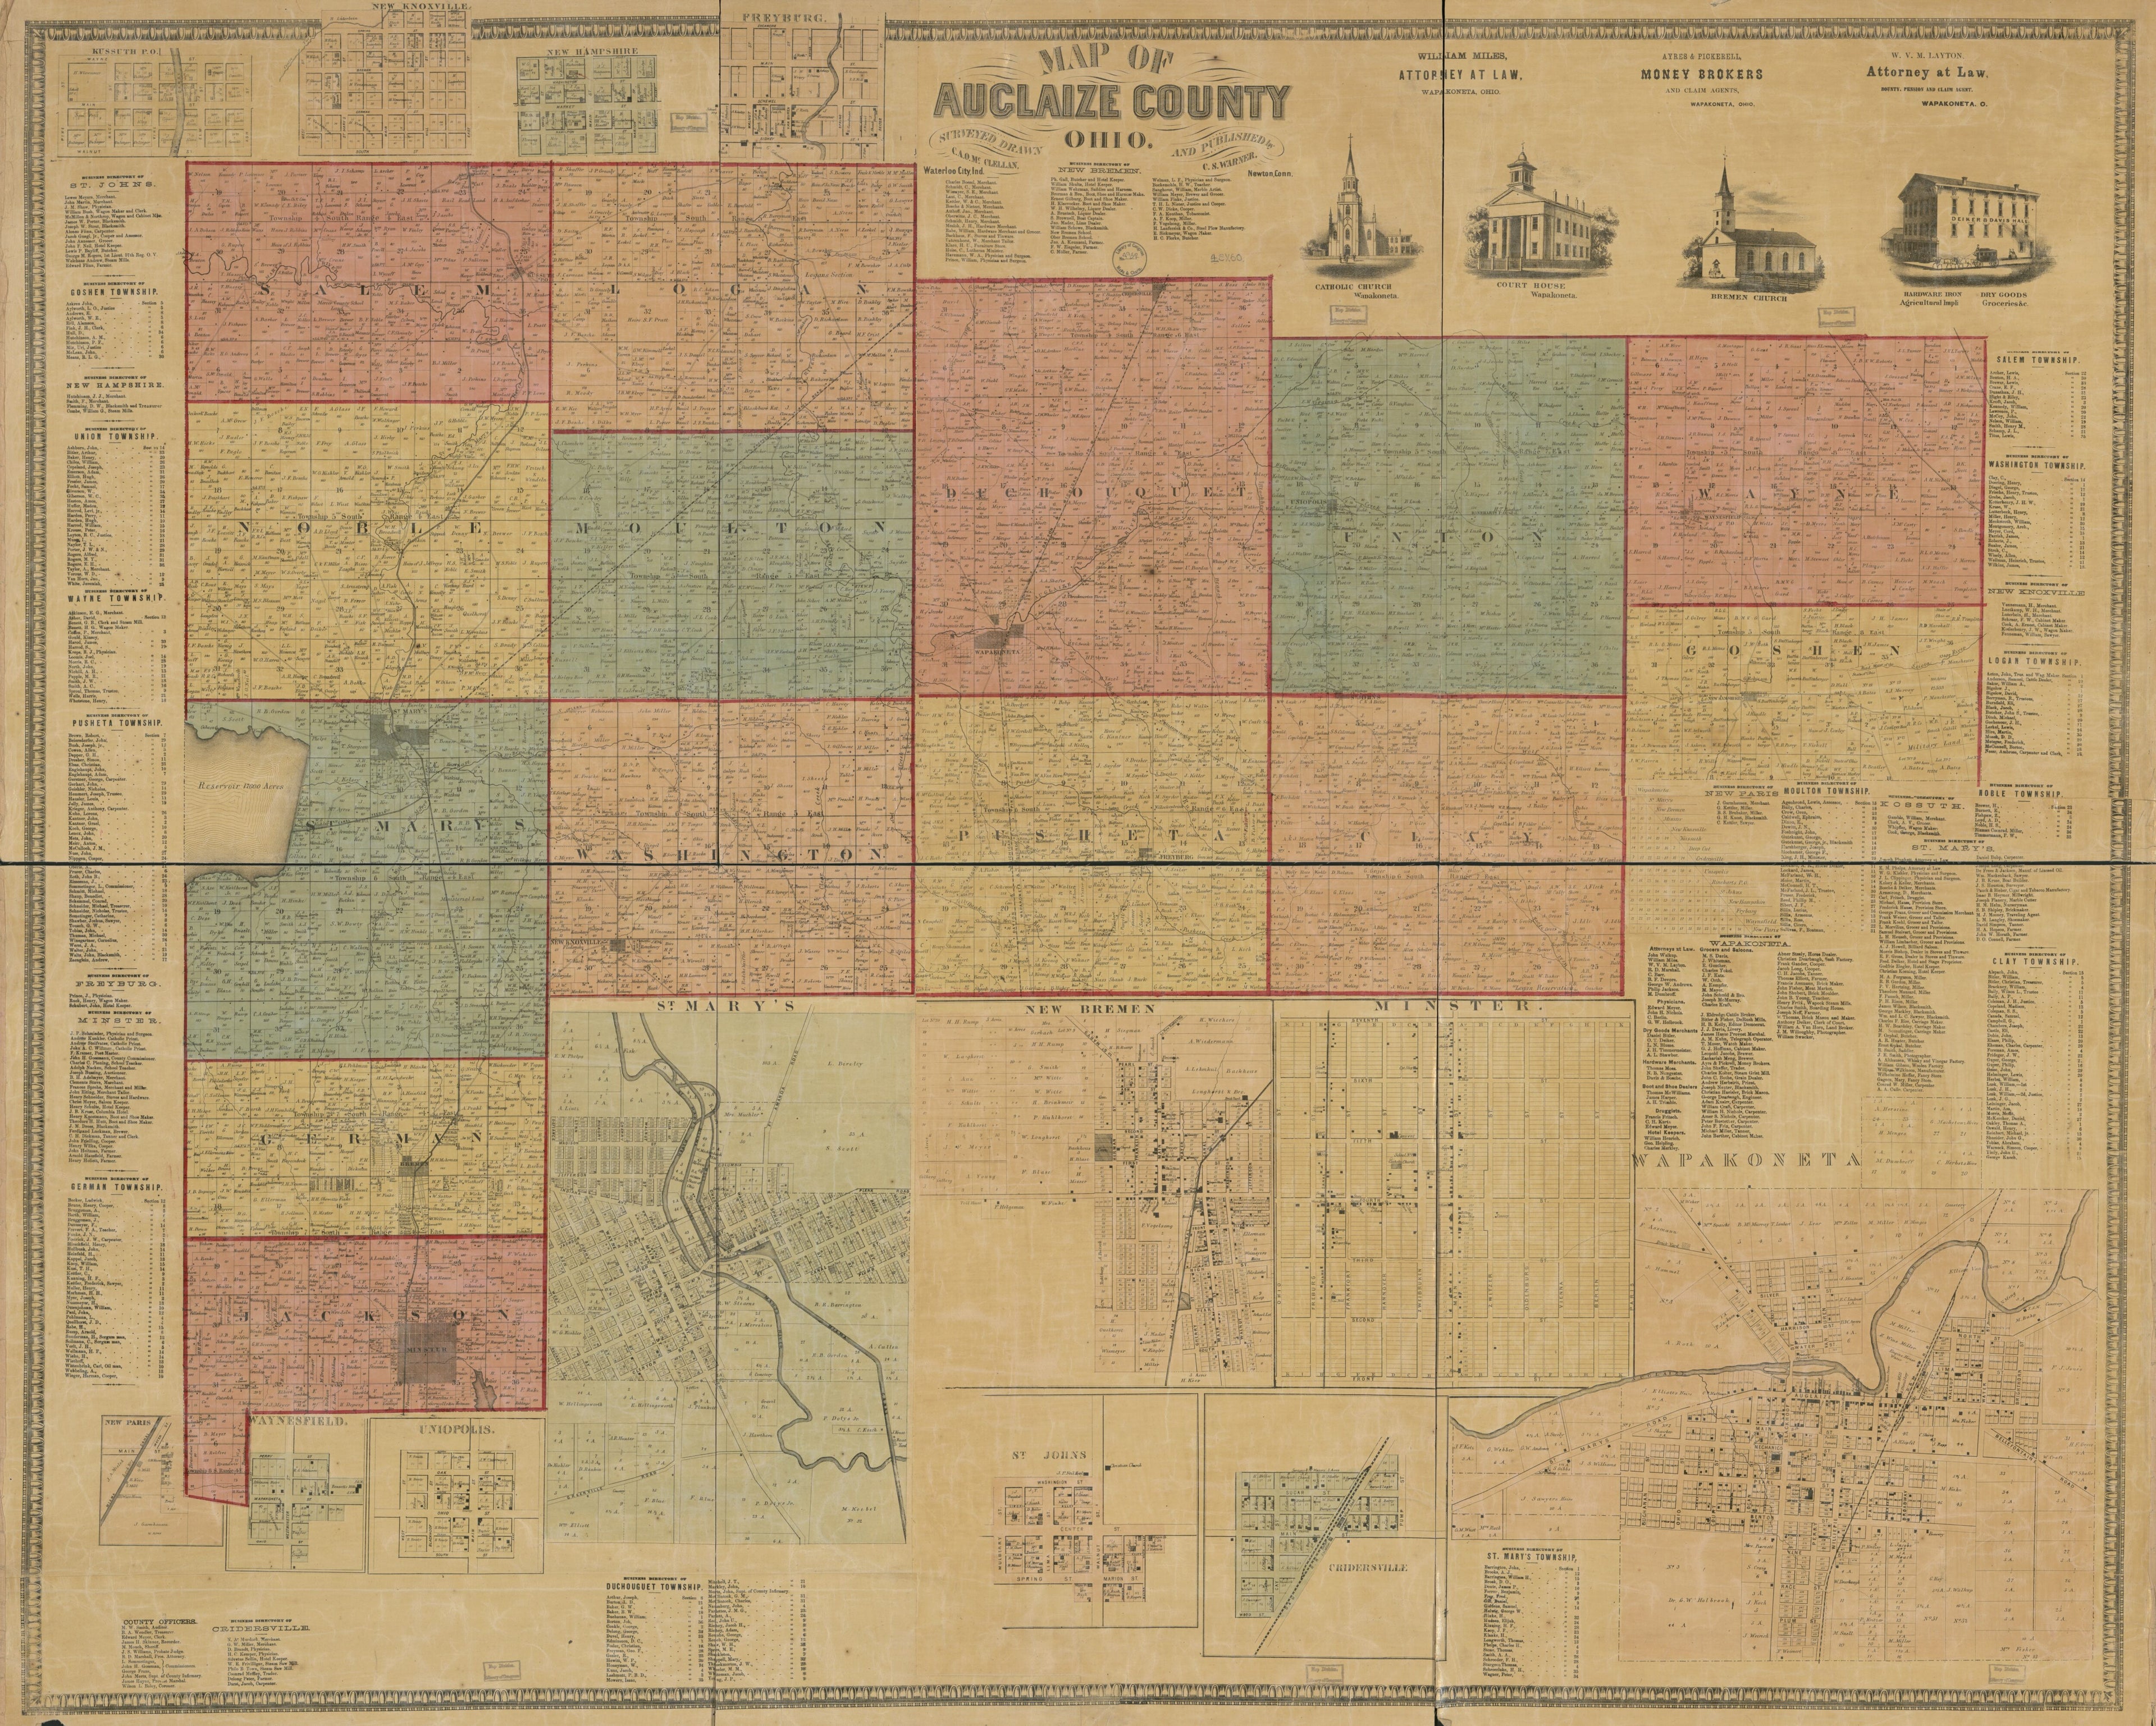 This old map of Map of Auglaize County, Ohio from 1860 was created by C. A. O. McClellan, C. S. (Charles S.) Warner in 1860